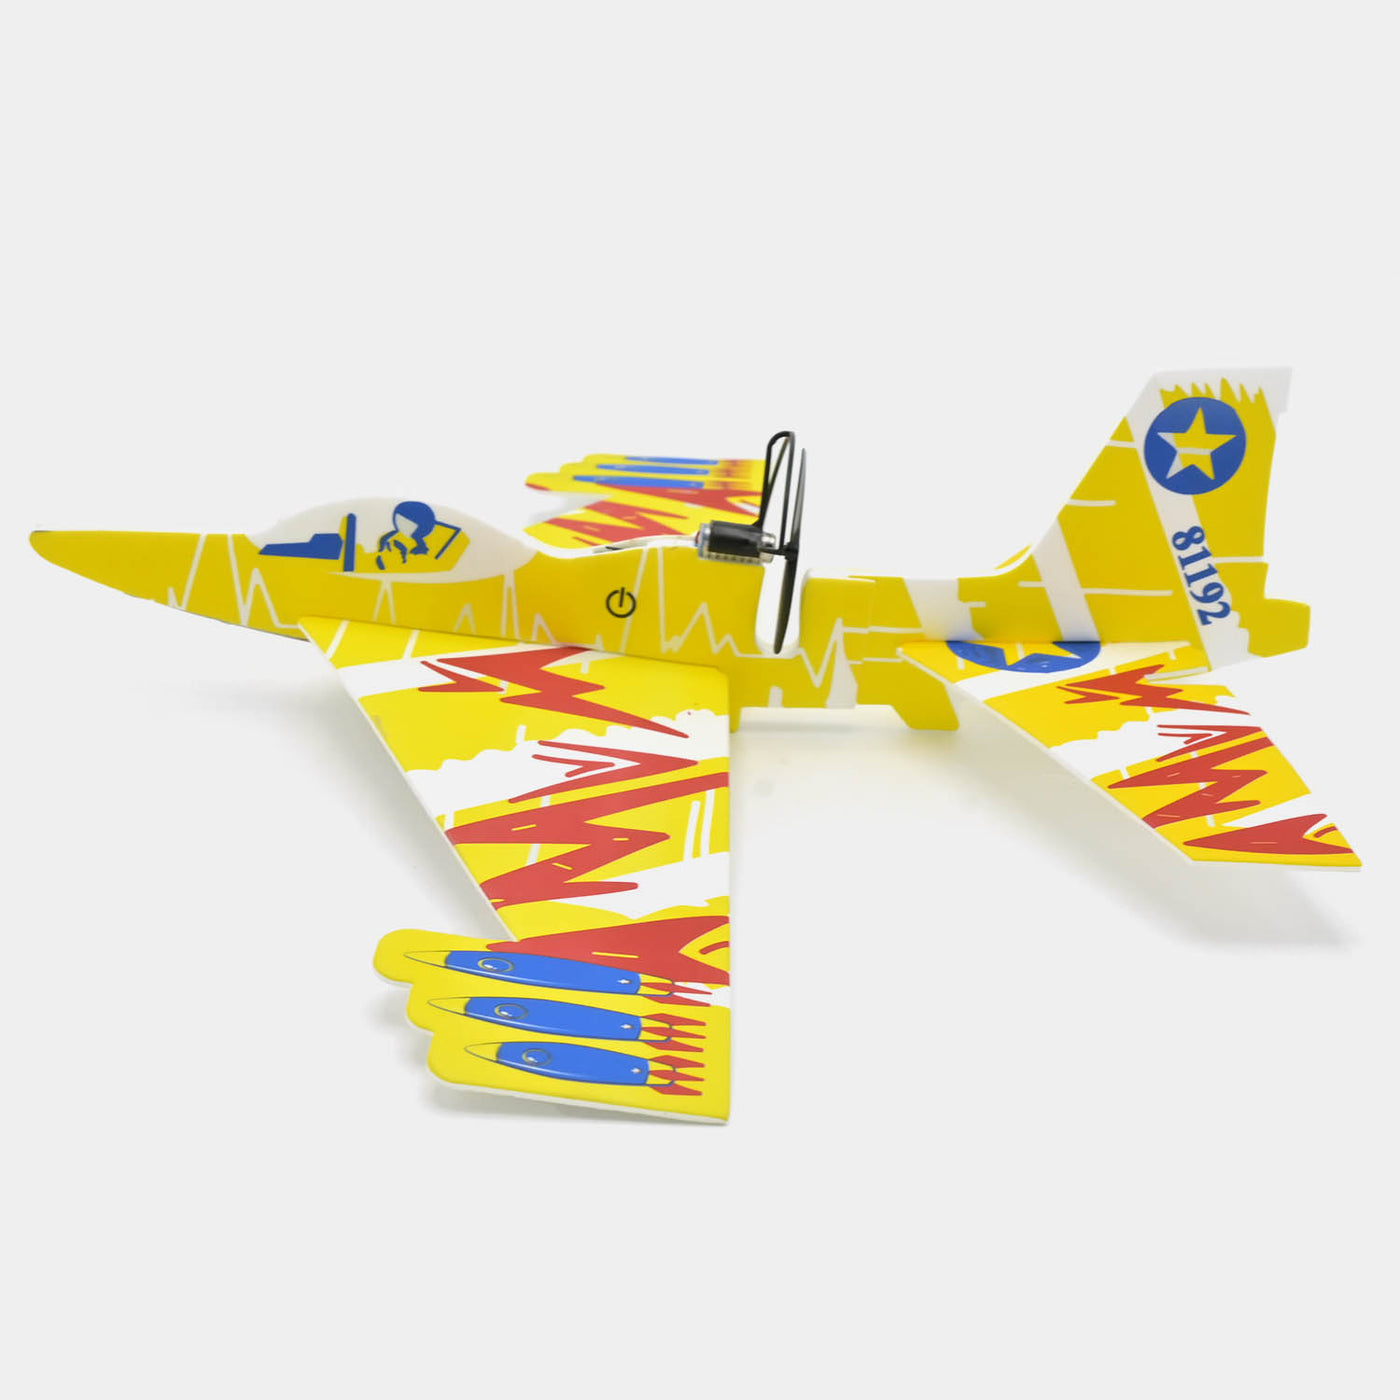 Rechargeable Foamy Glider Aircraft With Lights - Yellow